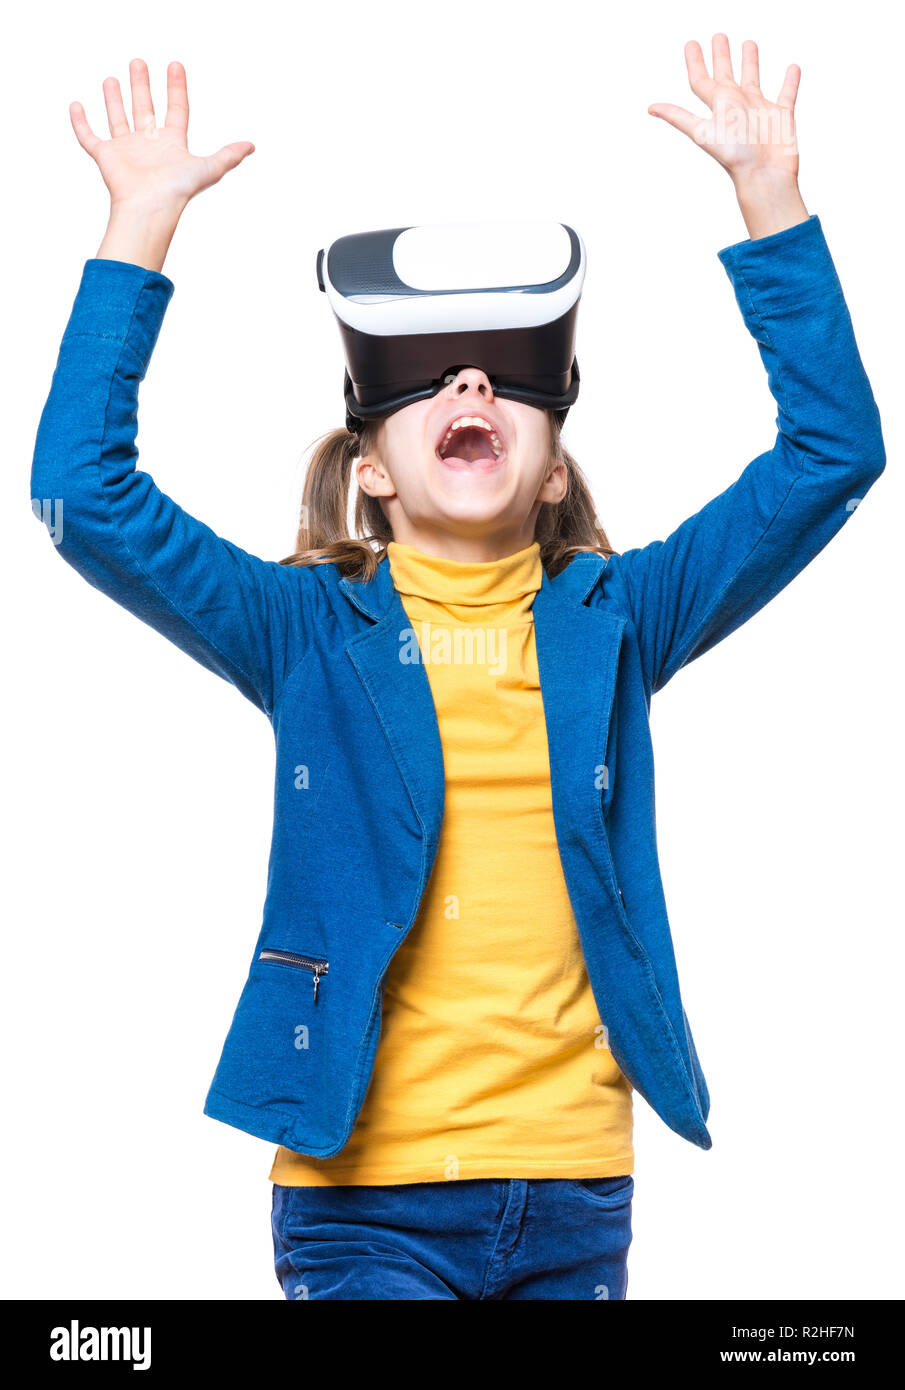 Little girl with VR glasses Stock Photo